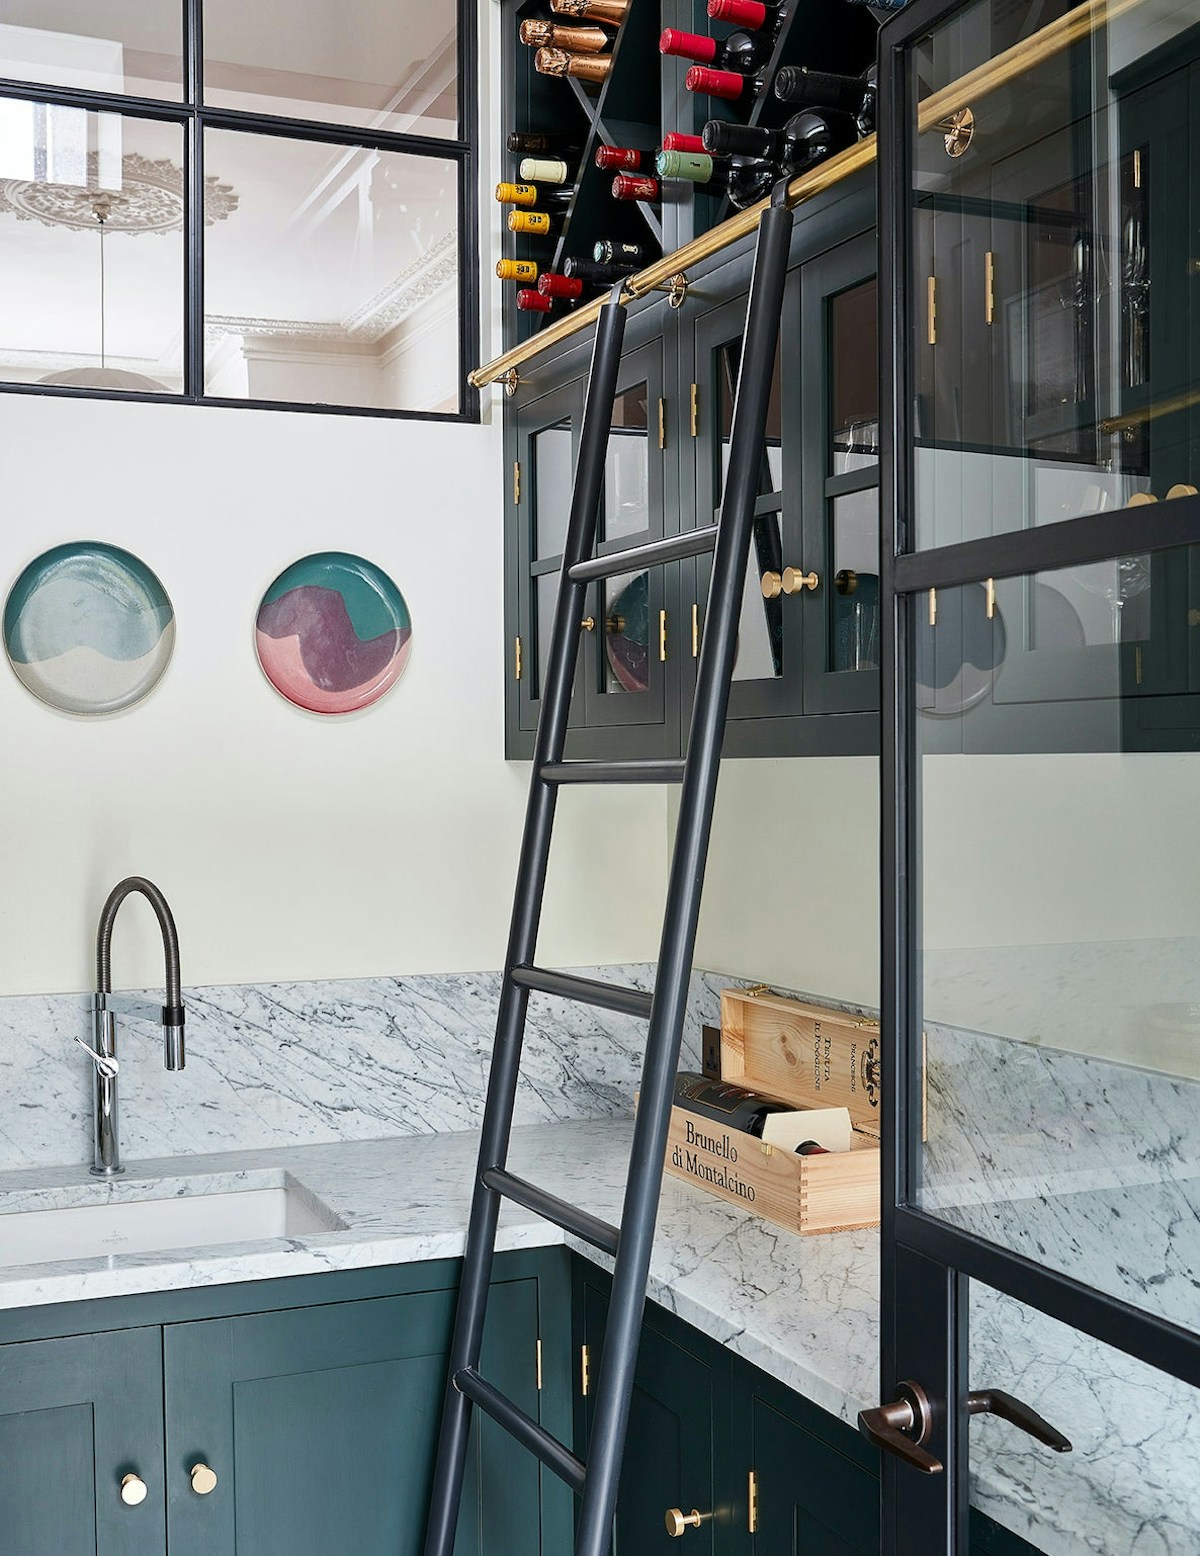 Ladders In Kitchens - The Latest Kitchen Trends in 2019 with Blakes London - LuxDeco.com